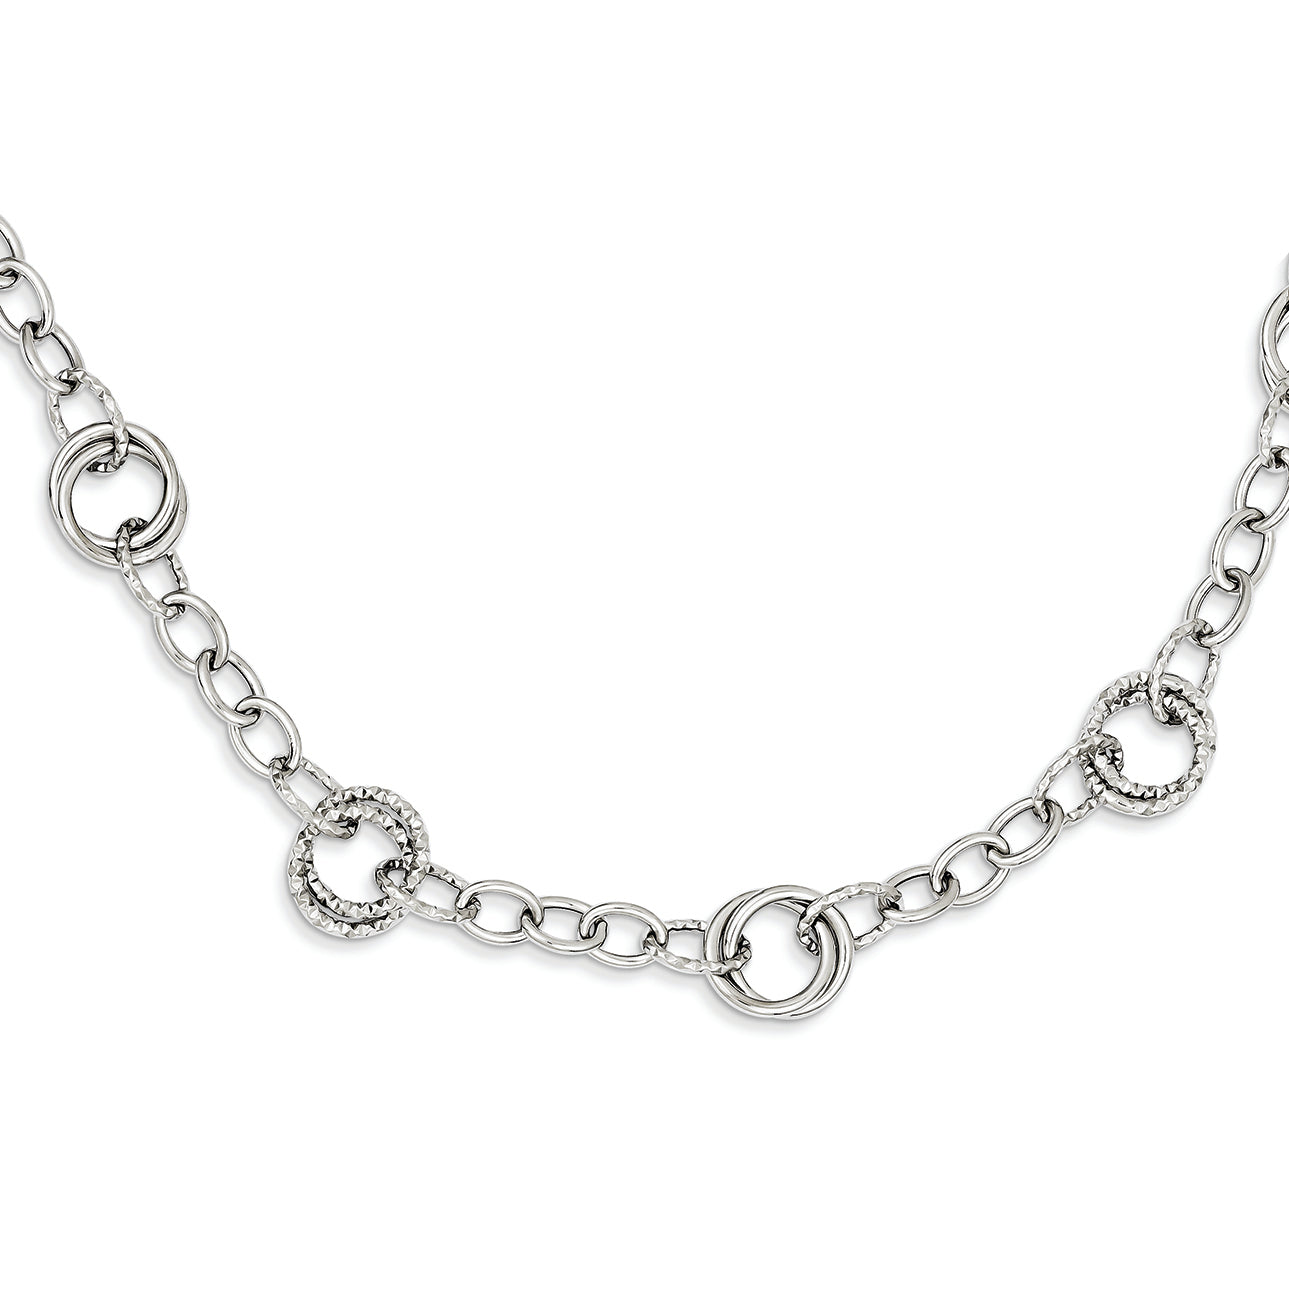 14K White Gold Polished Fancy Link Chain 18 Inches